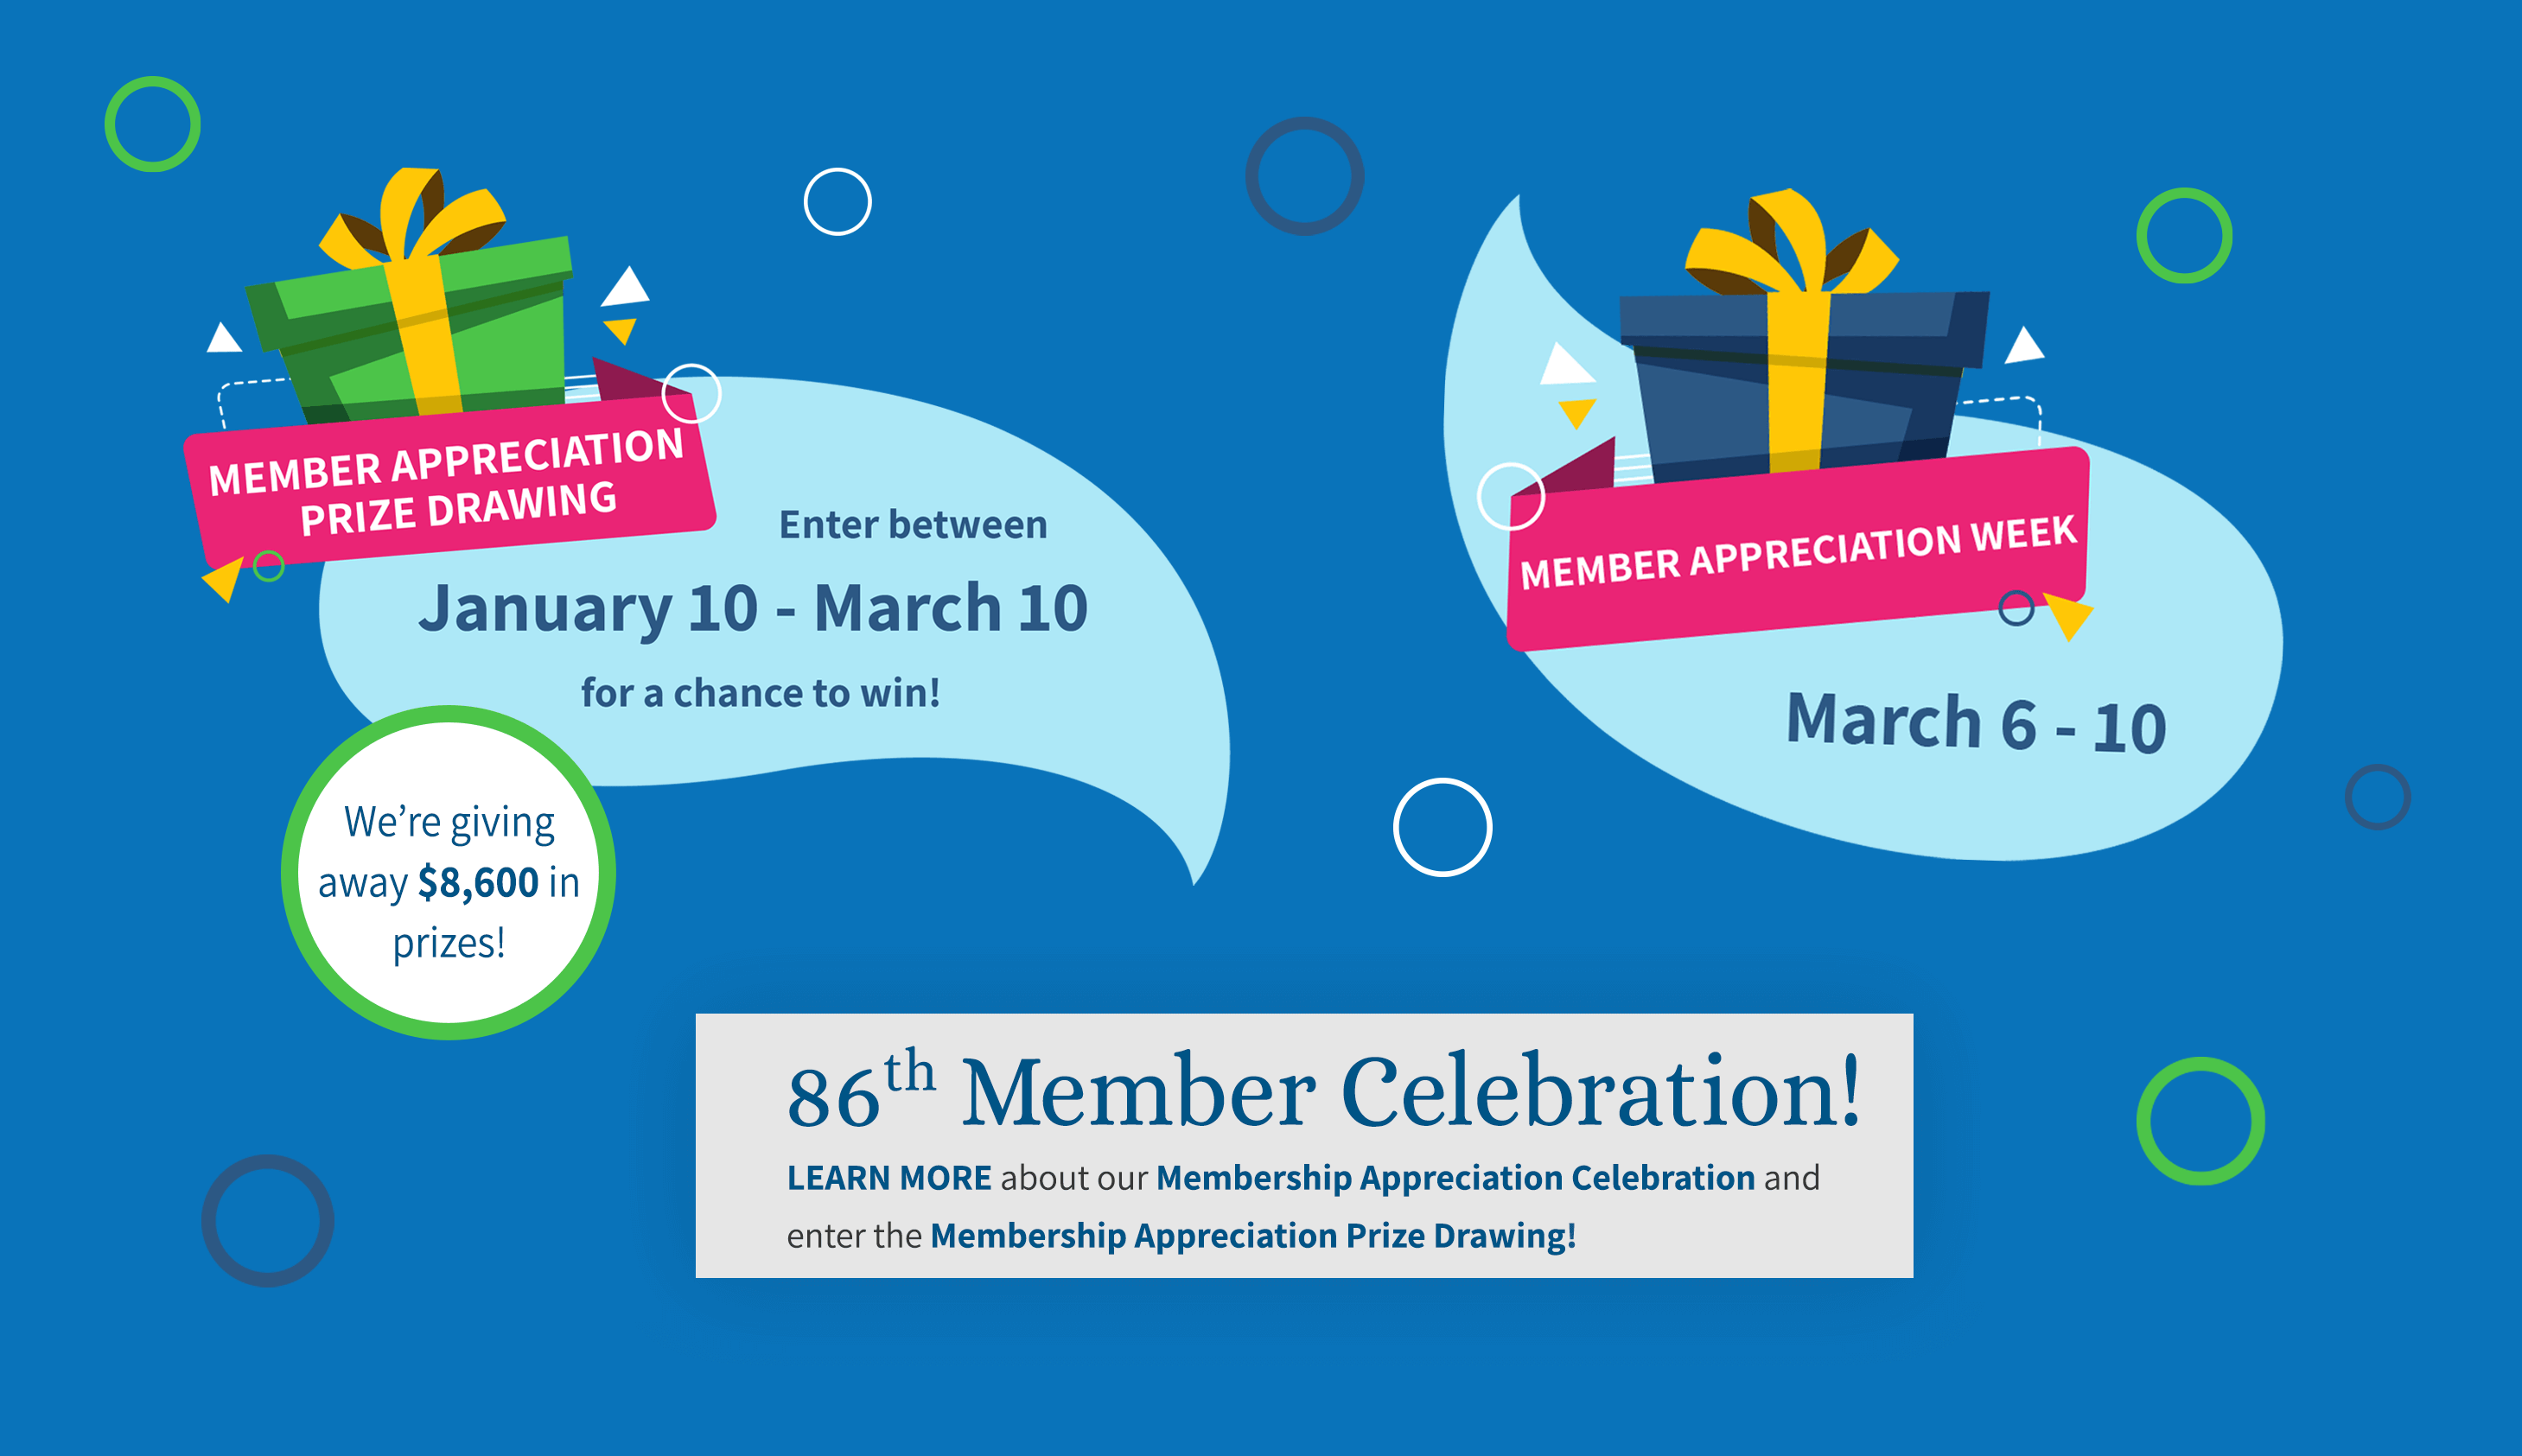 Member appreciation week March 6 - 10. Member Appreciation Prize Drawing enter between January 10 - March 10 for a chance to win. We're giving away $8,600 in prizes. Click for details.